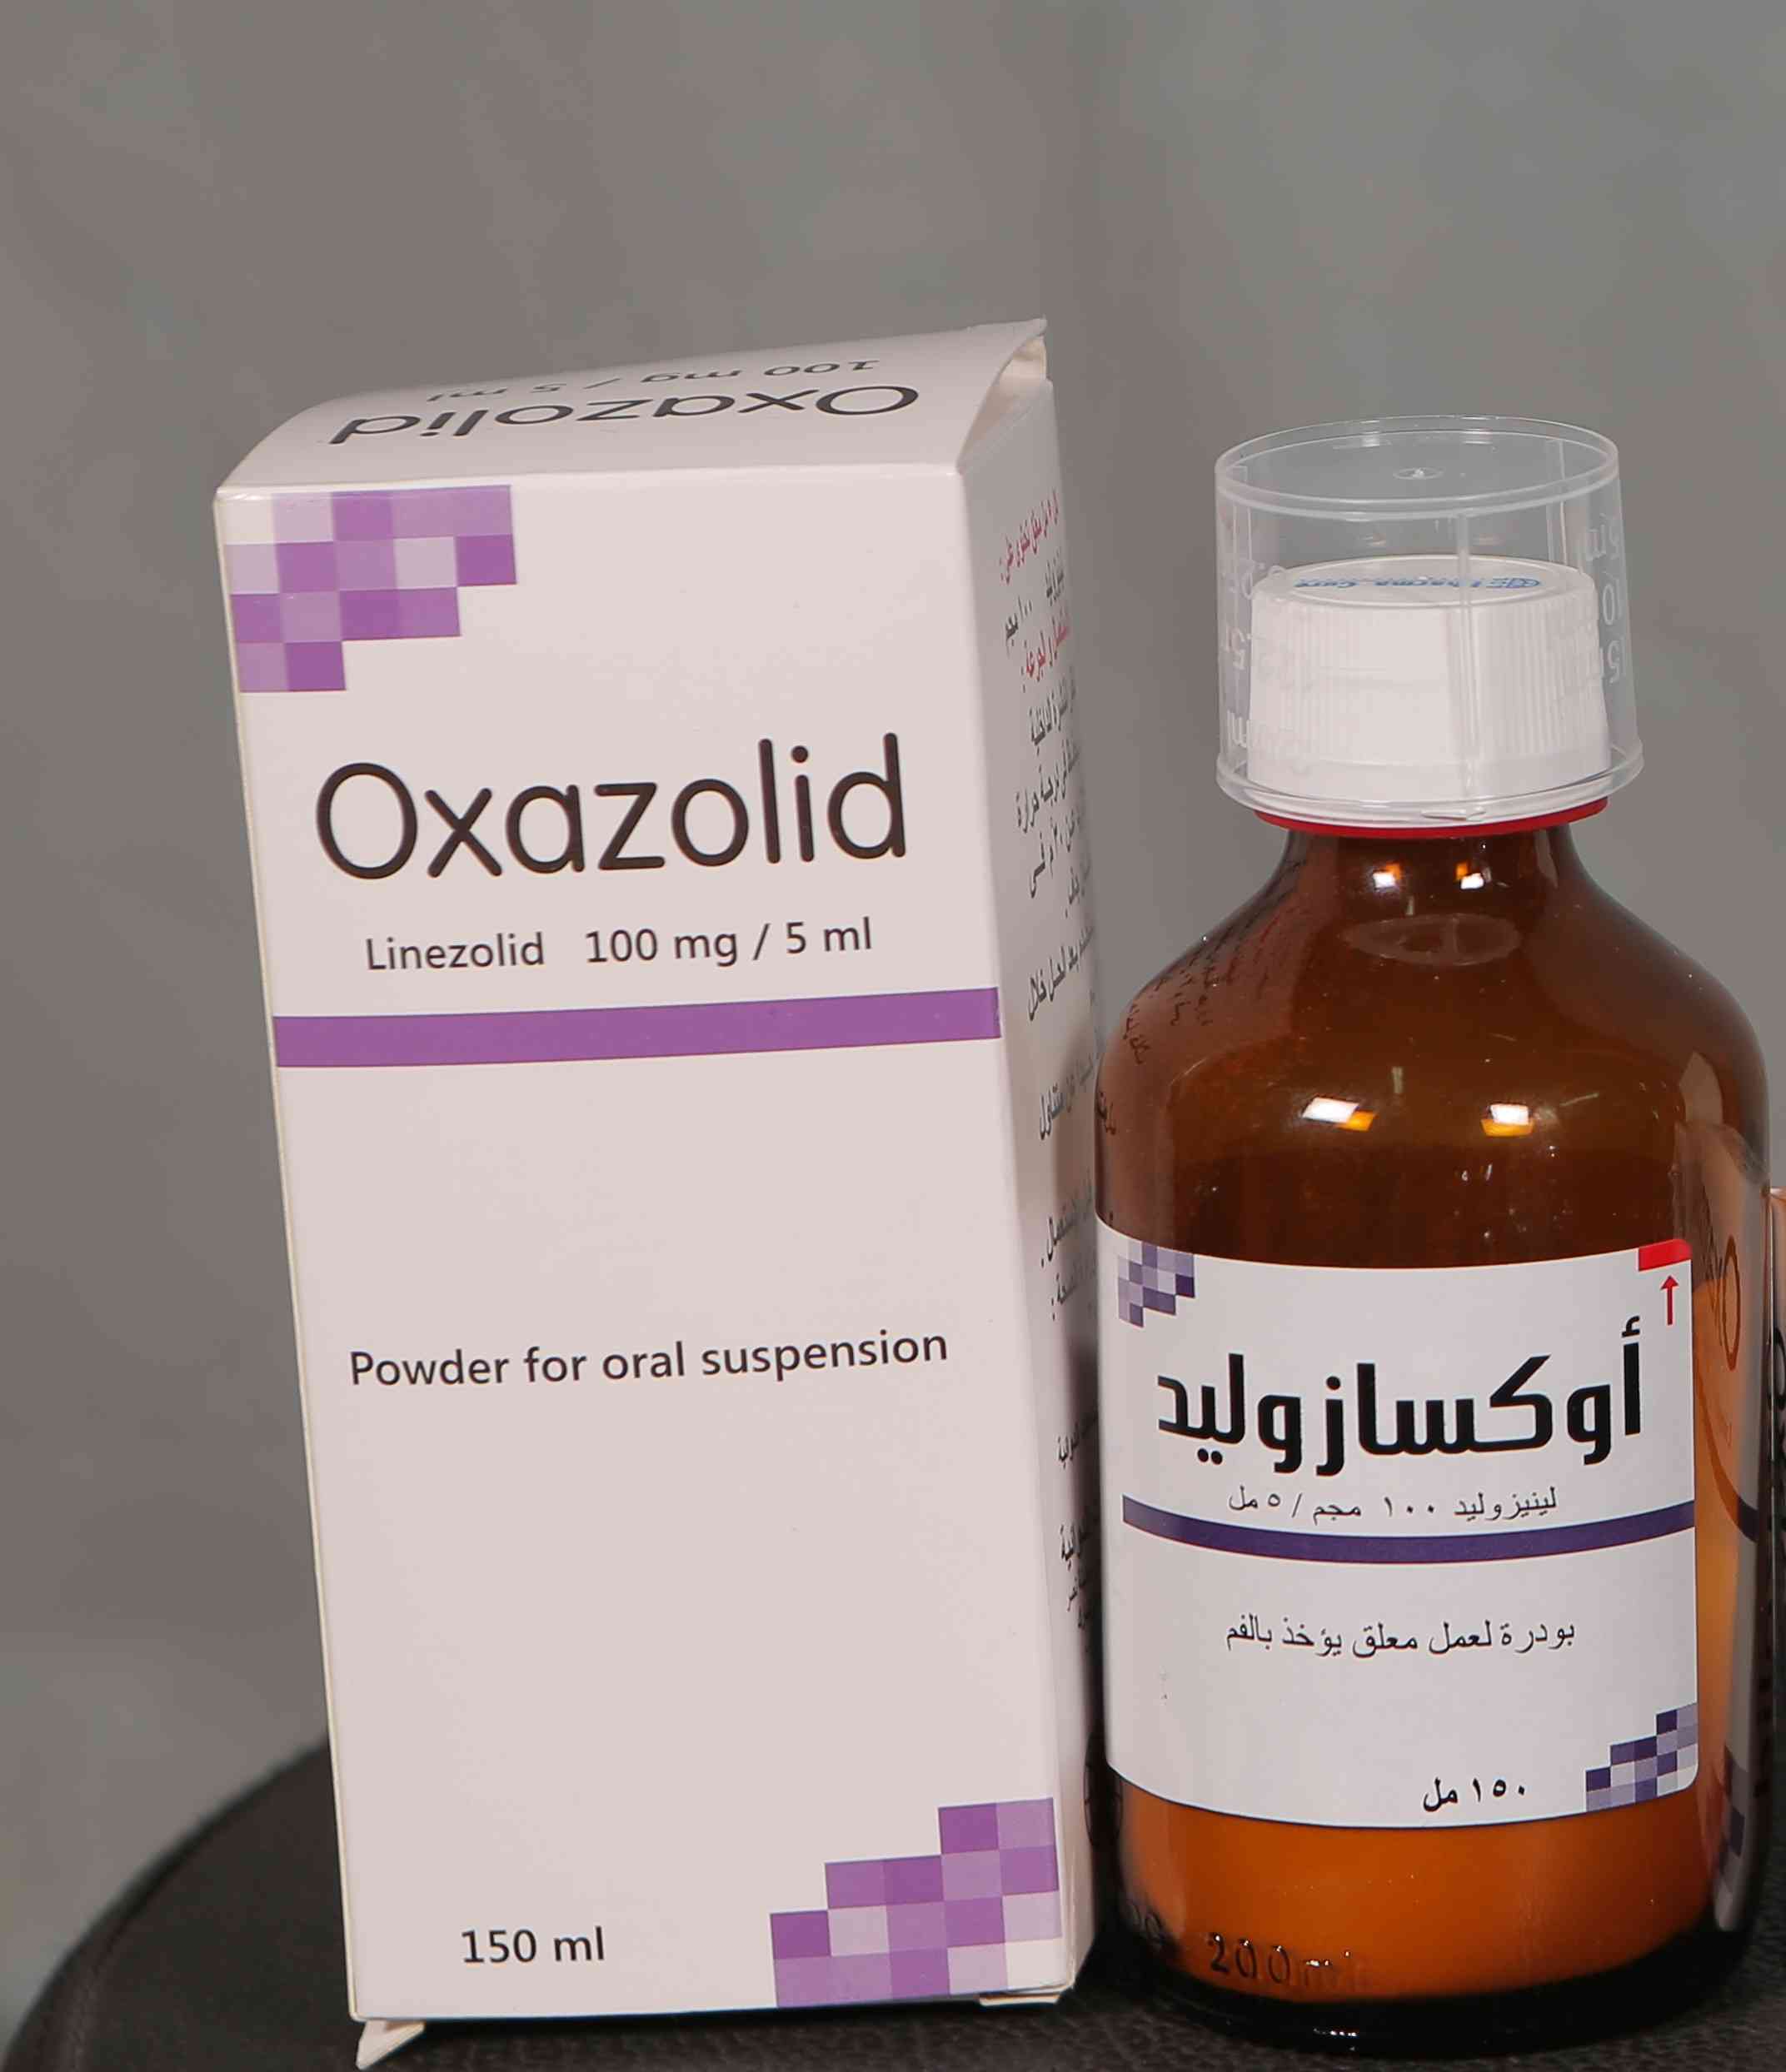 Oxazolid 100mg/5ml pd. for oral susp. 150 ml